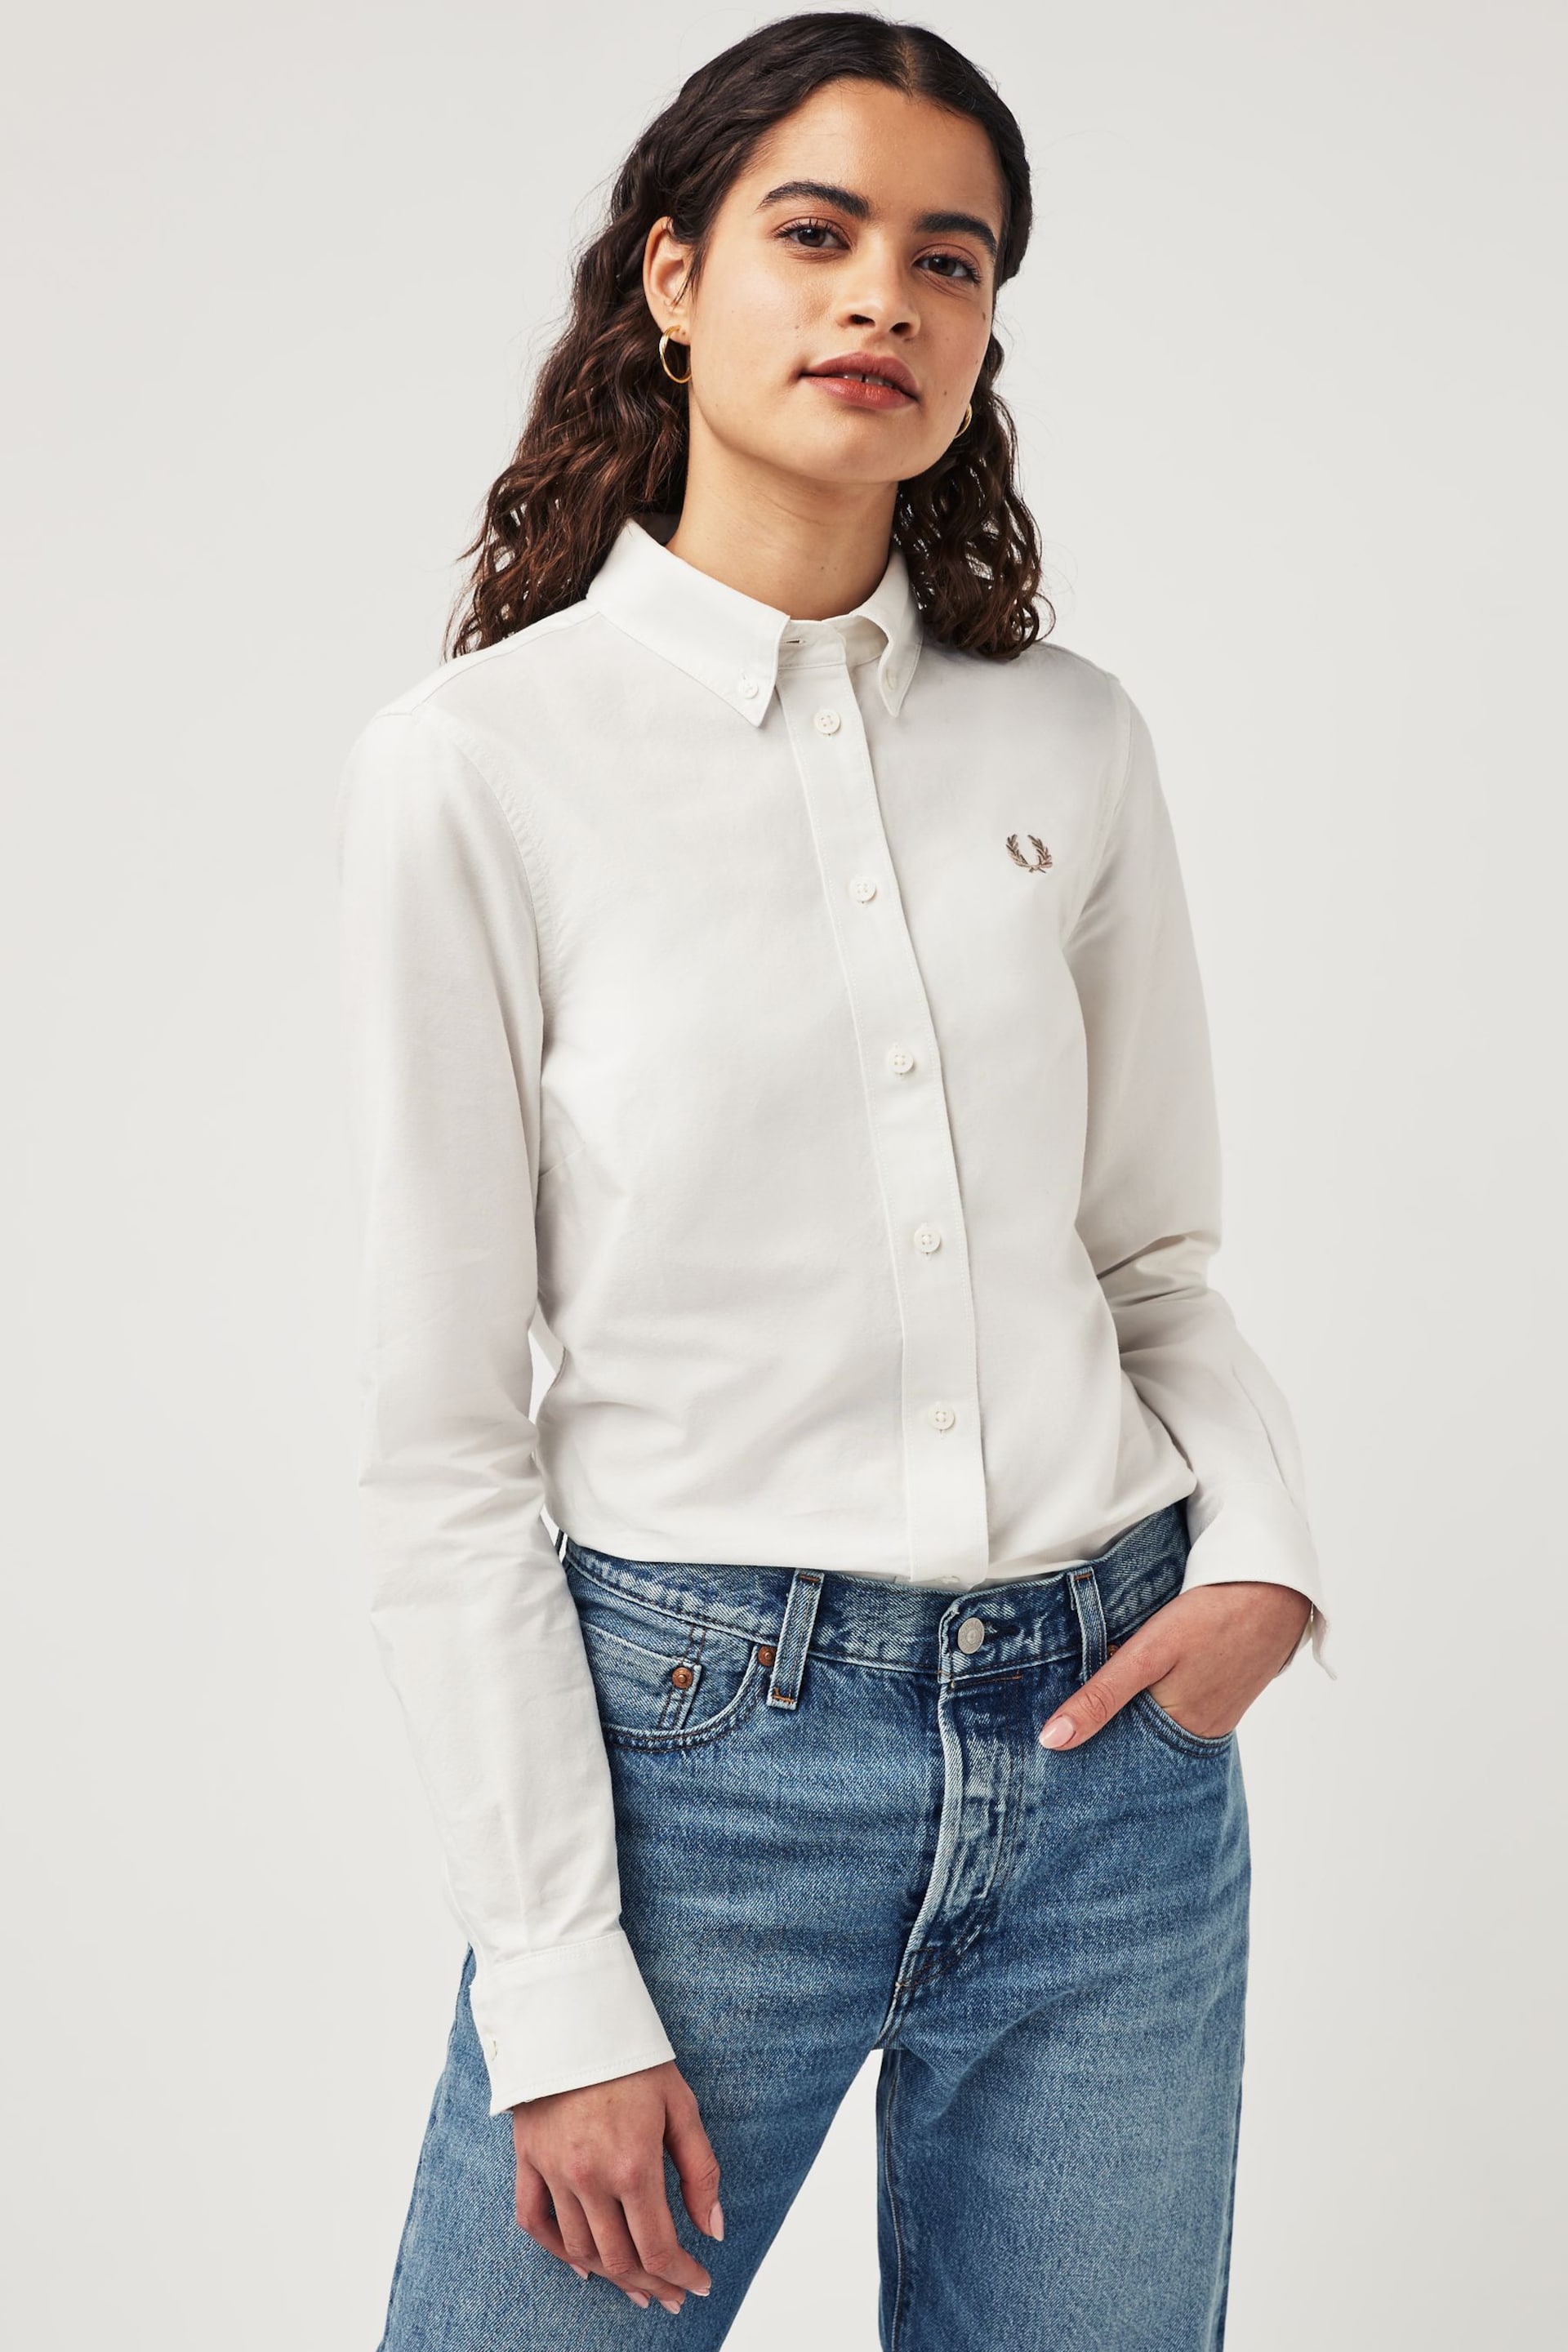 Fred Perry Button Down White Shirt - Image 1 of 4